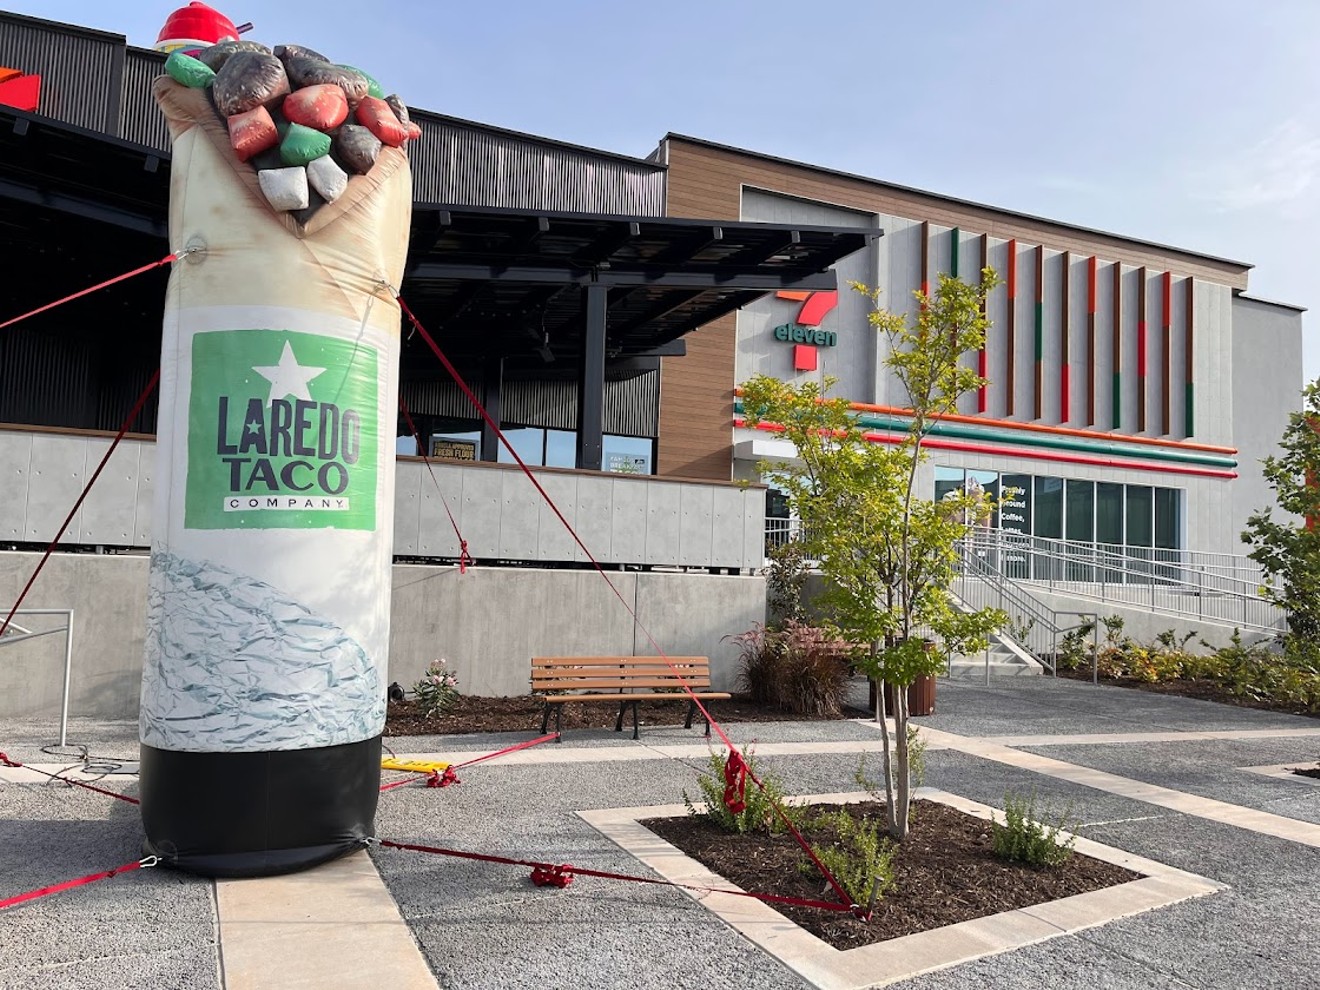 A big, inflatable burrito greets guests of the new 7-11 concept at the corner Preston and Alpha Road that houses the Laredo Taco Company restaurant.